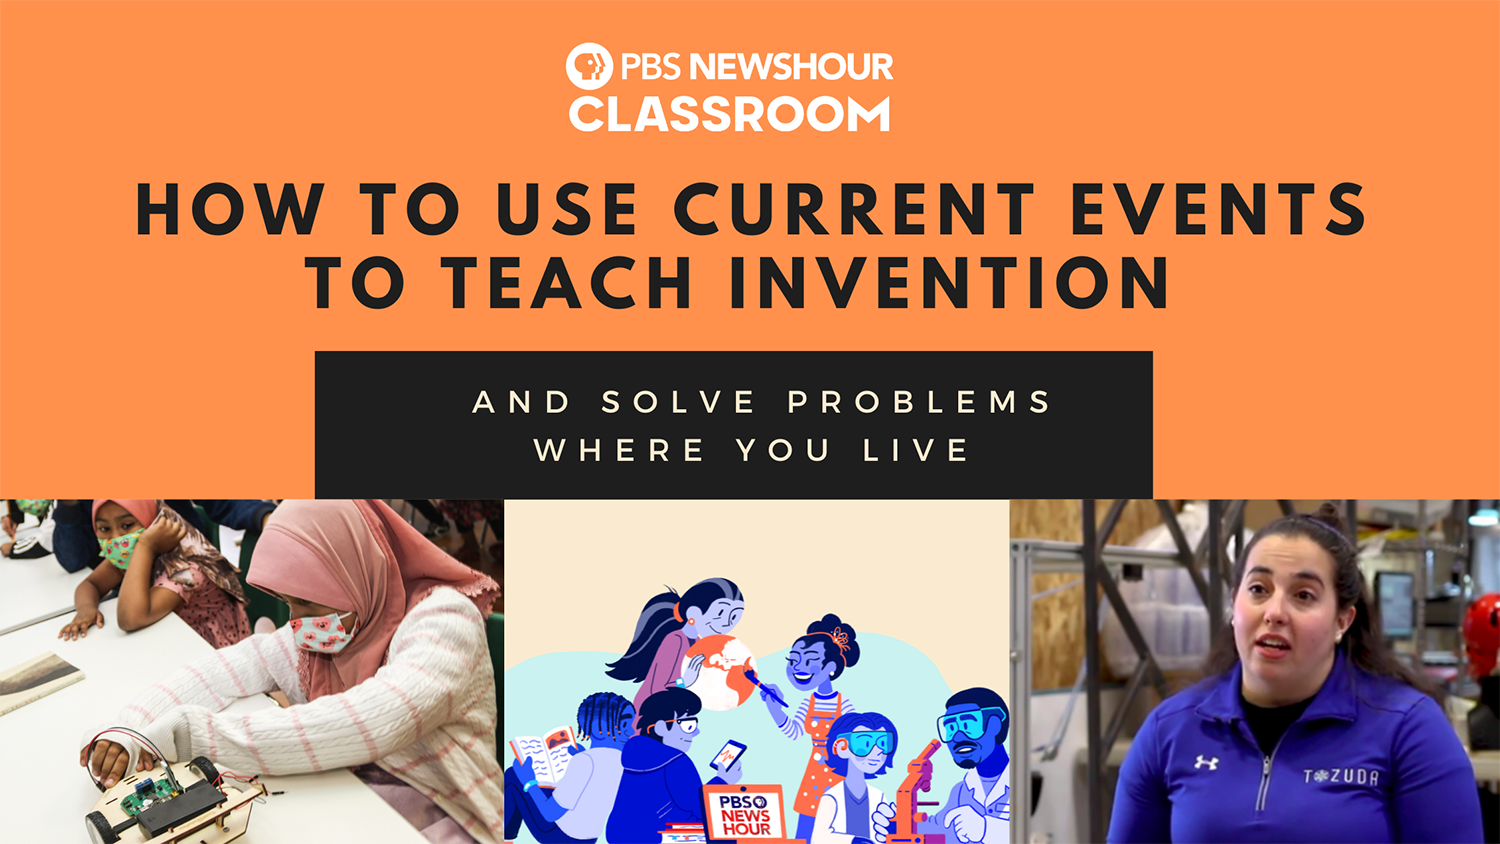 PBS newshour classroom: How to use current events to teach invention and solve problems where you live